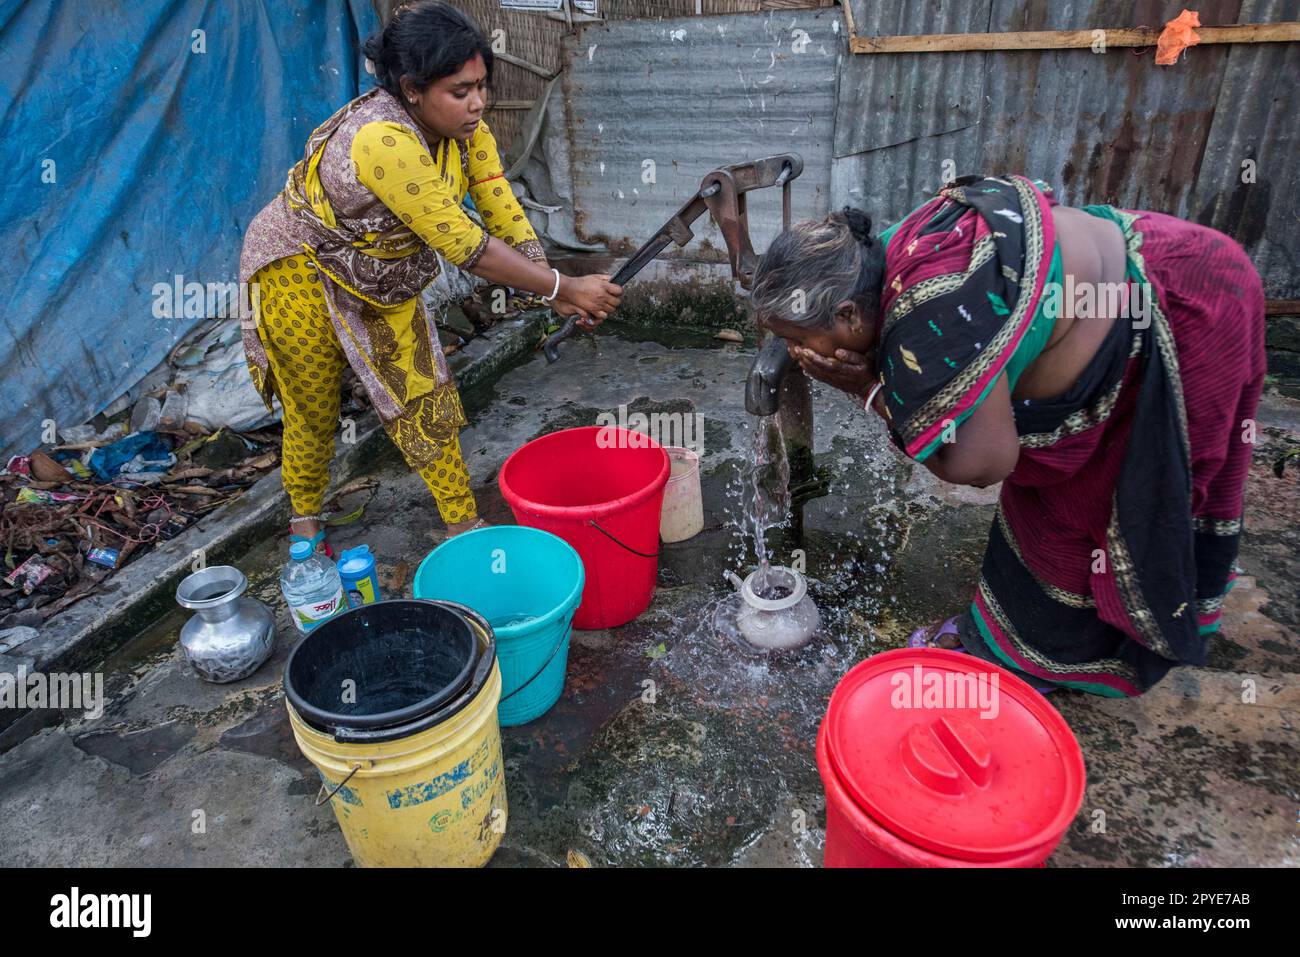 Bangladesh, Khulna, Sonadanga. Two women gather water from the local pump in Bangladesh. March 19, 2017. Editorial use only. Stock Photo